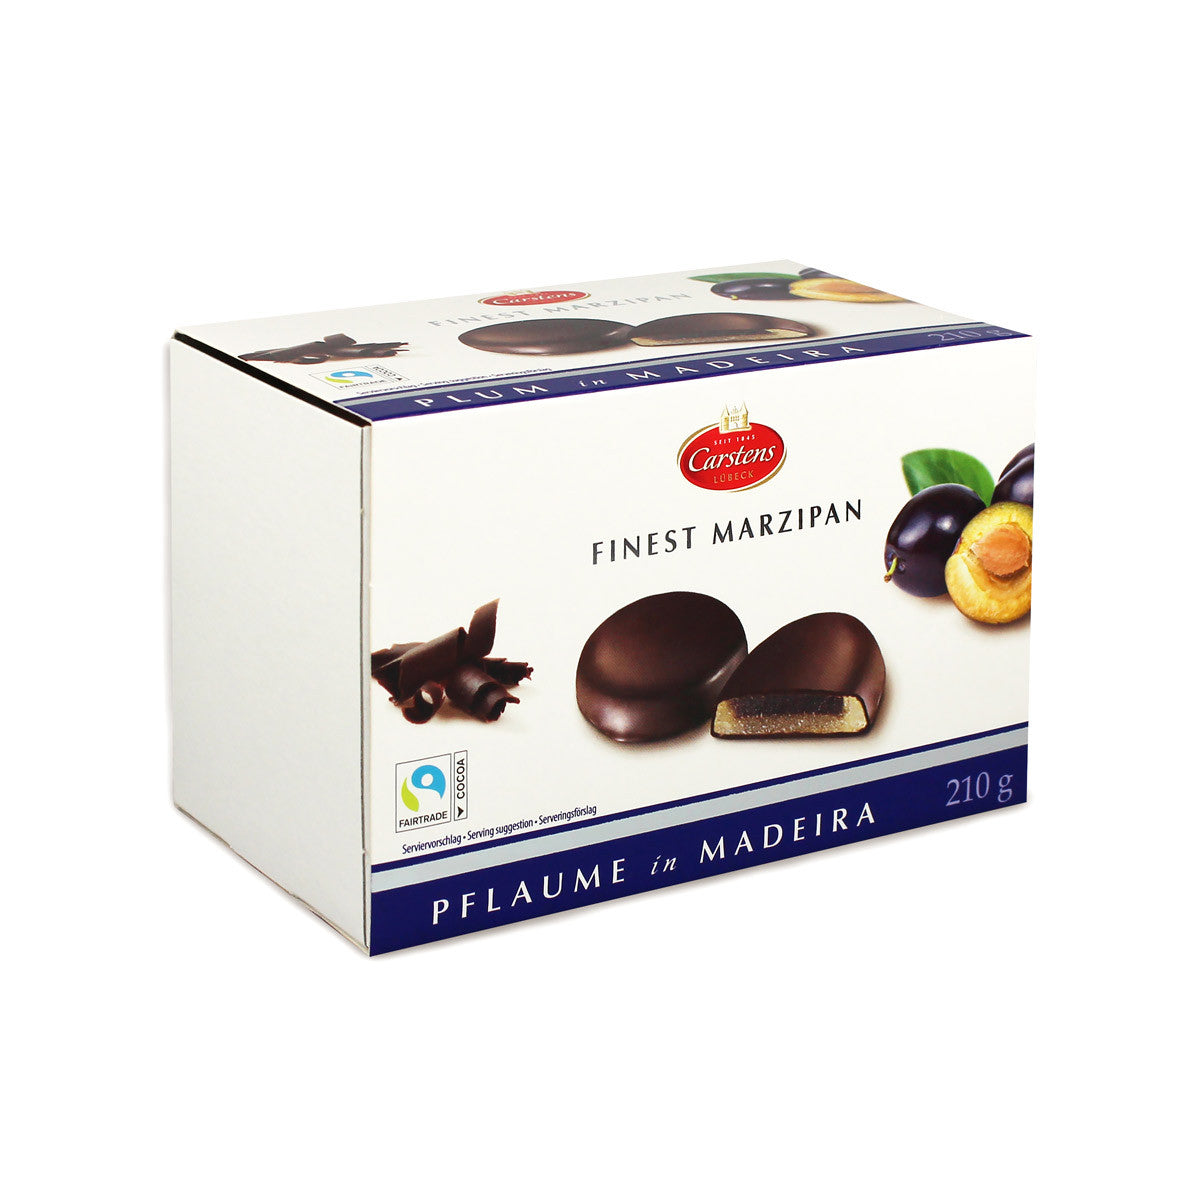 Plums in Chocolate – Piast Meats & Provisions